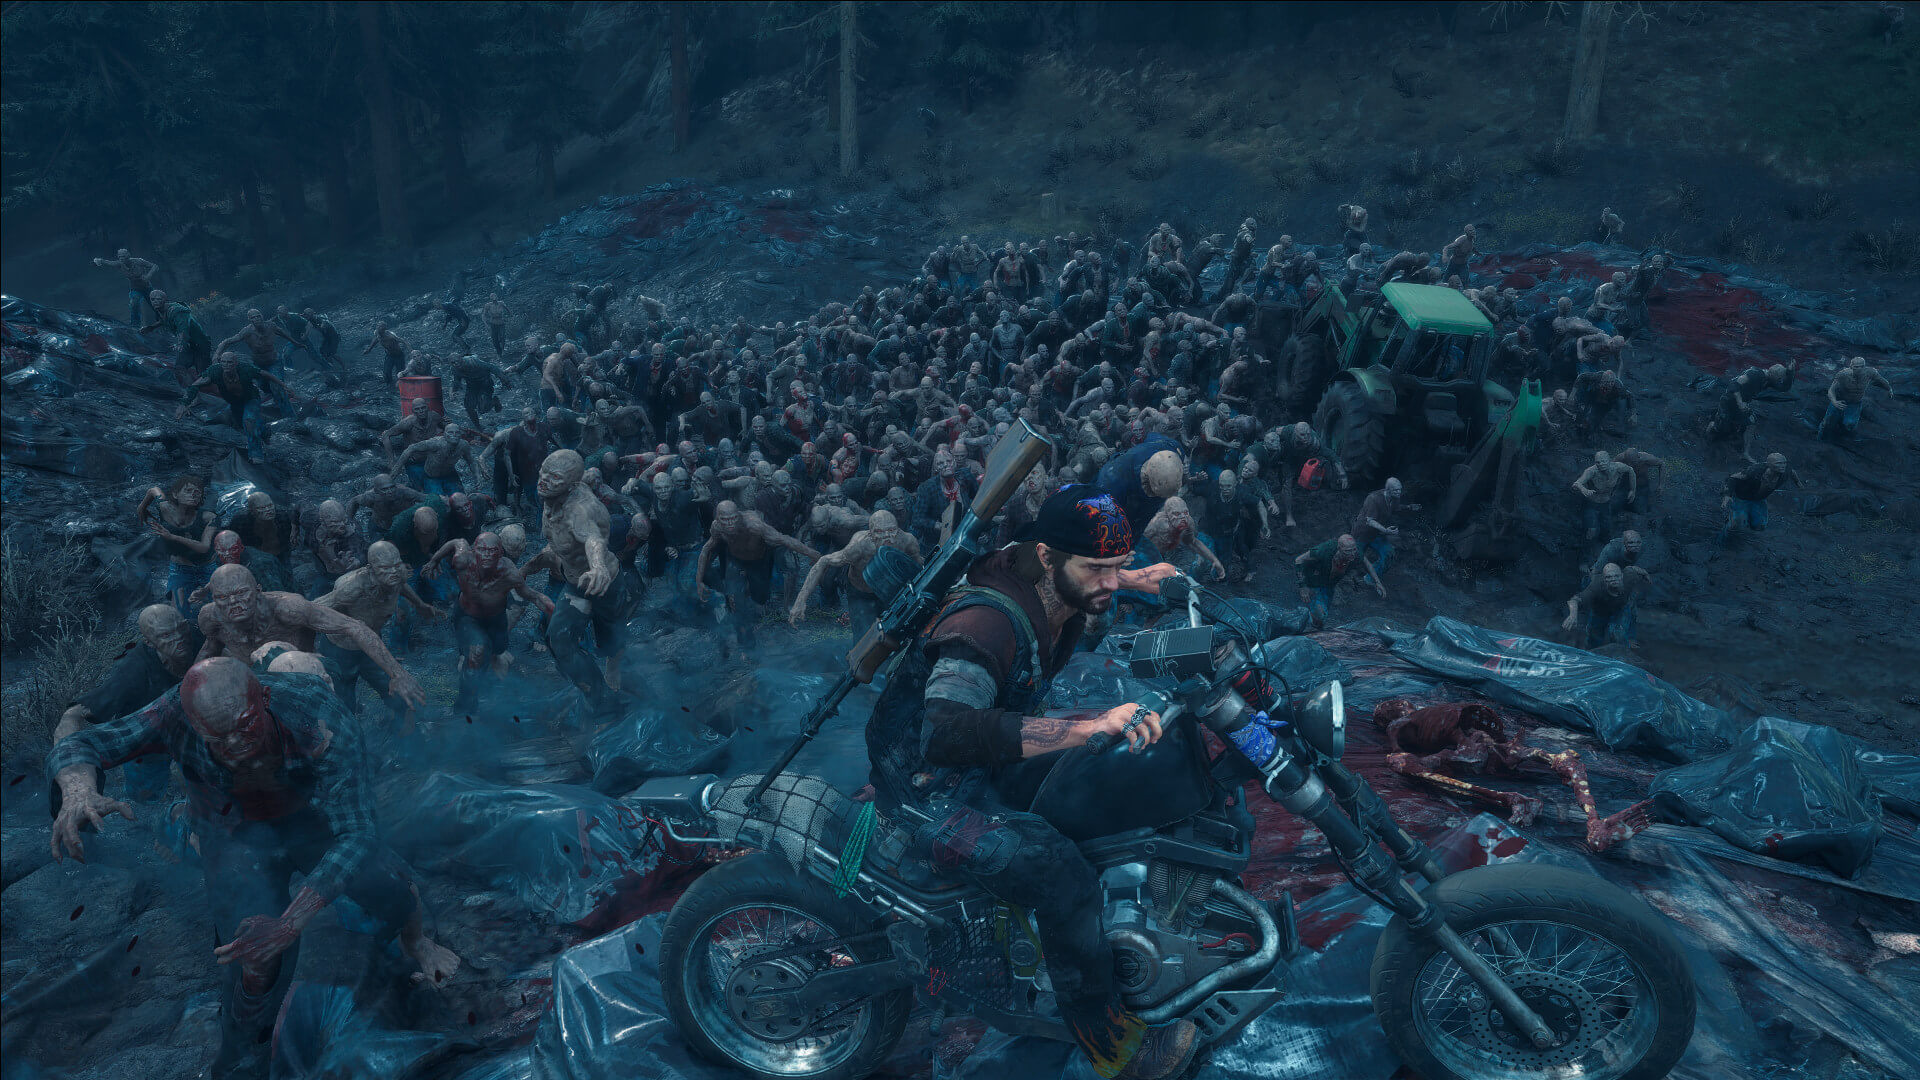 Days Gone Mod makes hordes more challenging, with up to 670